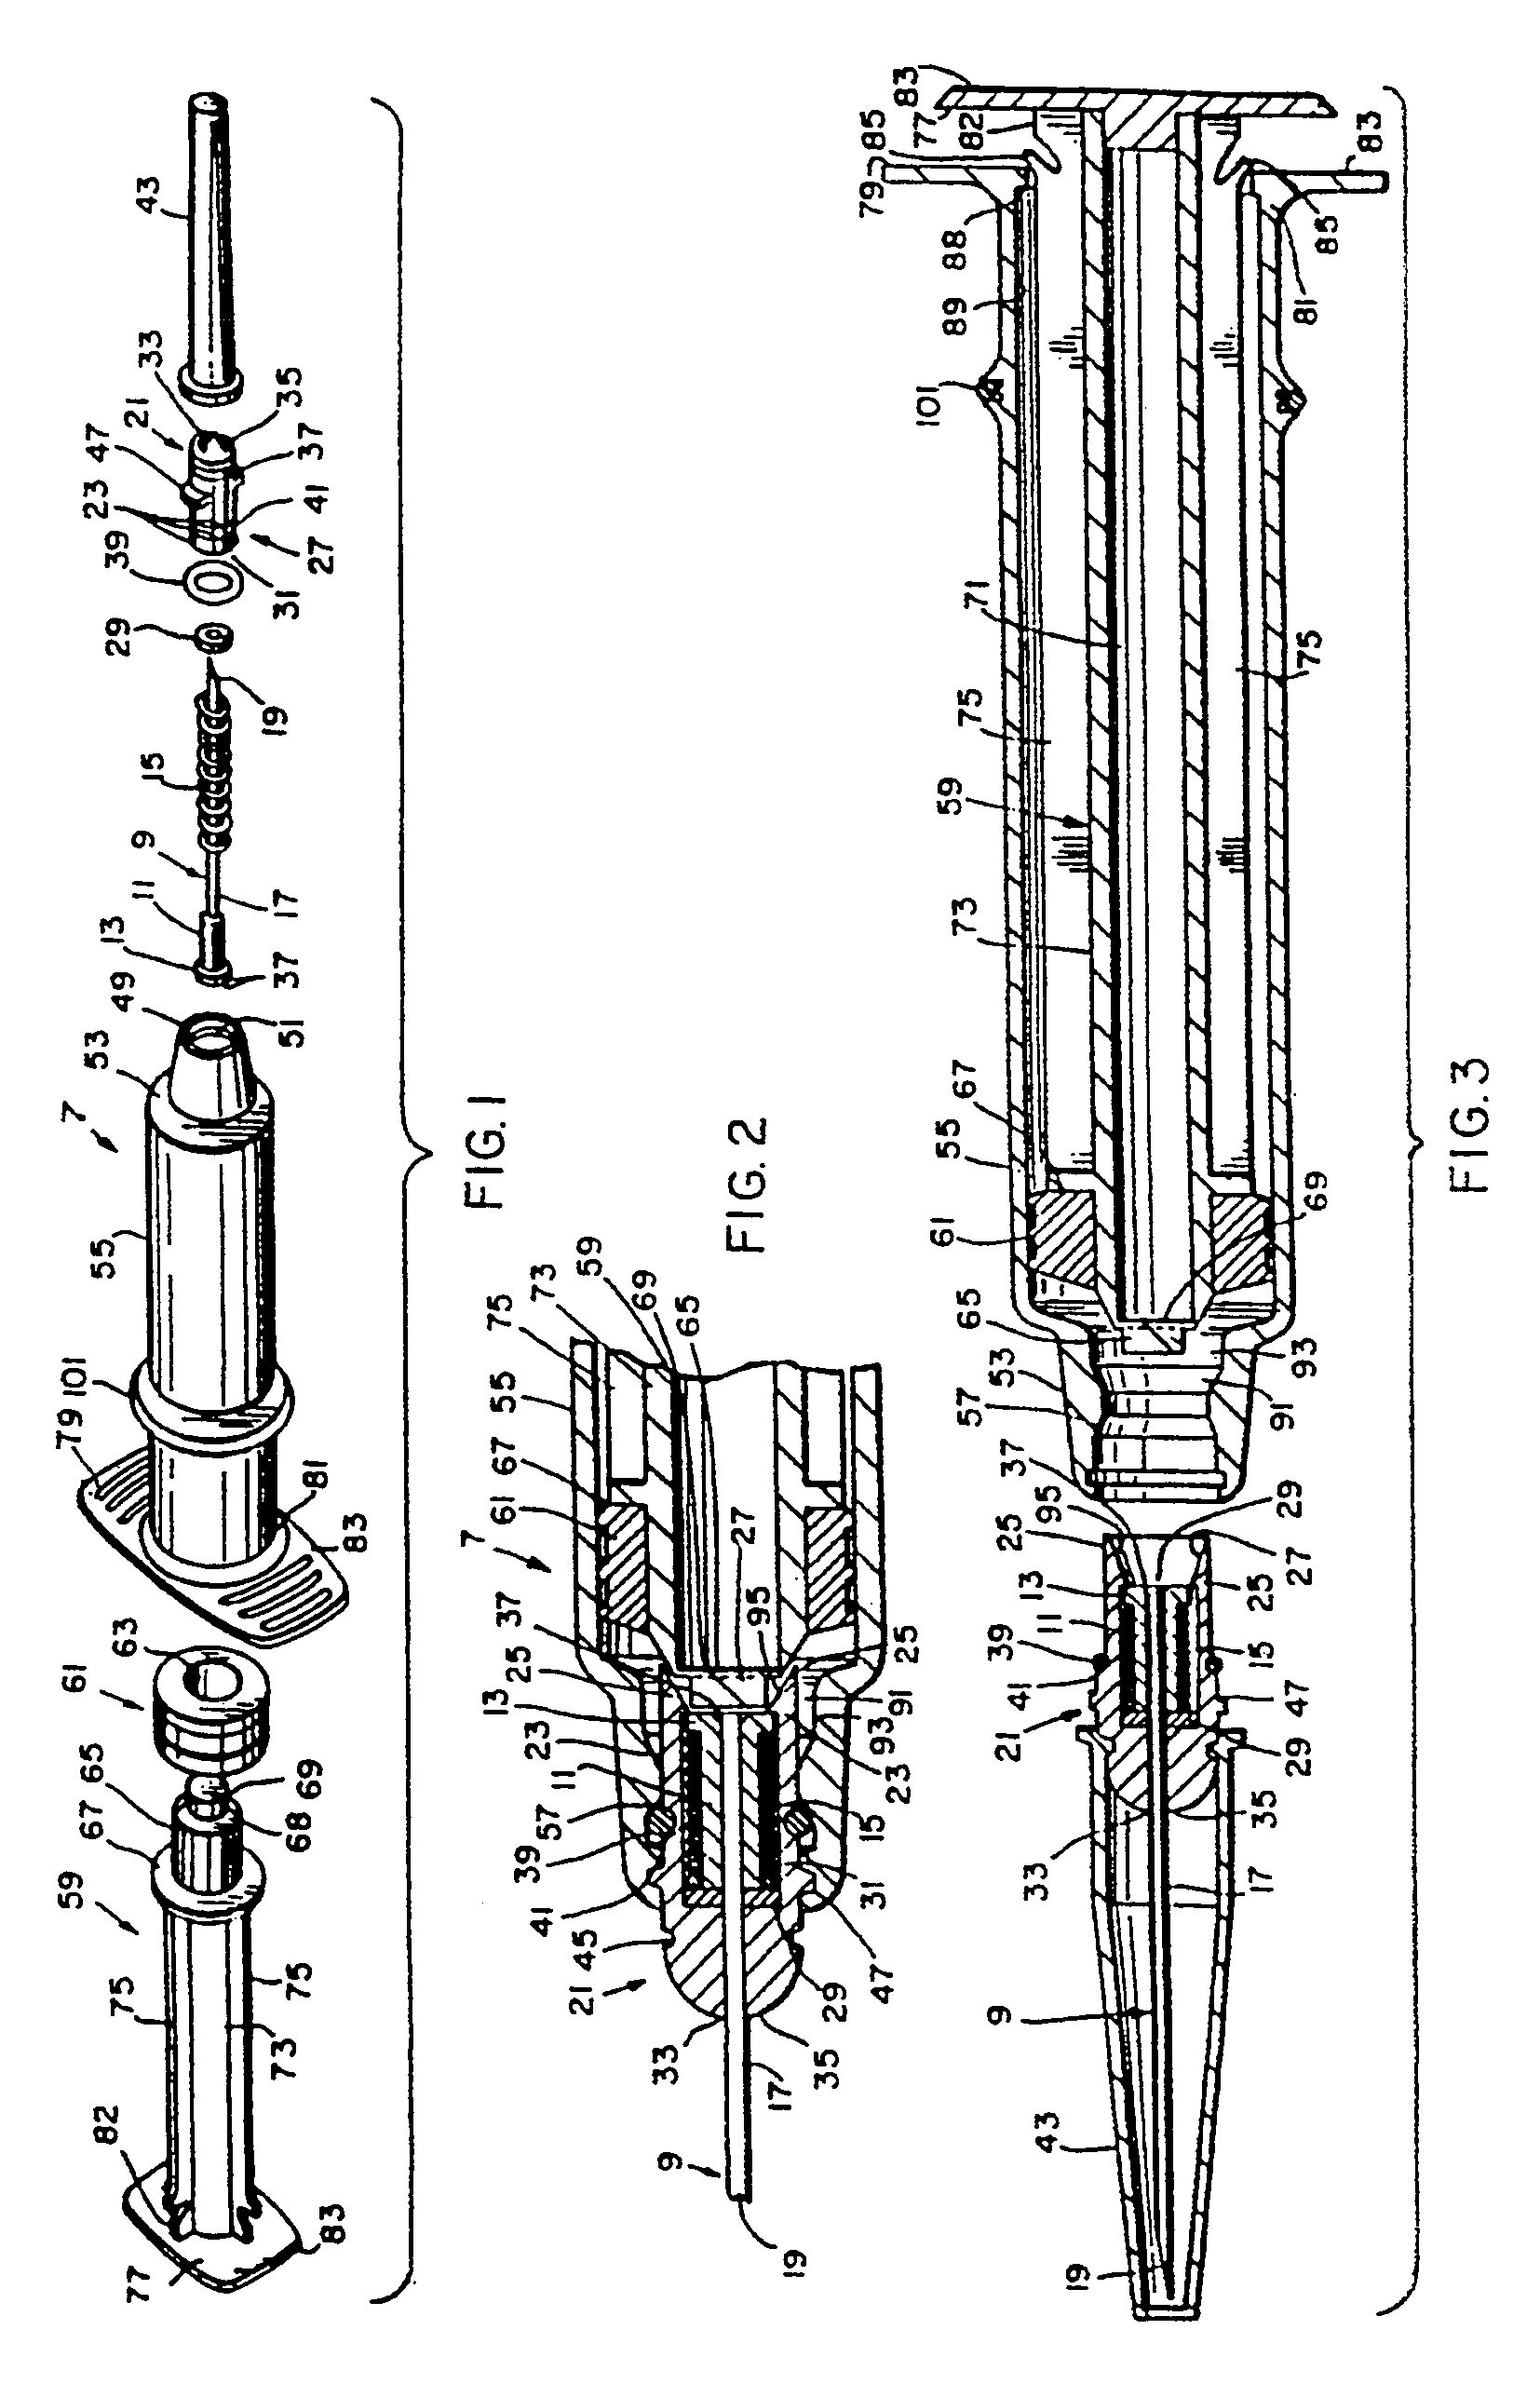 Medical devices with retractable needle